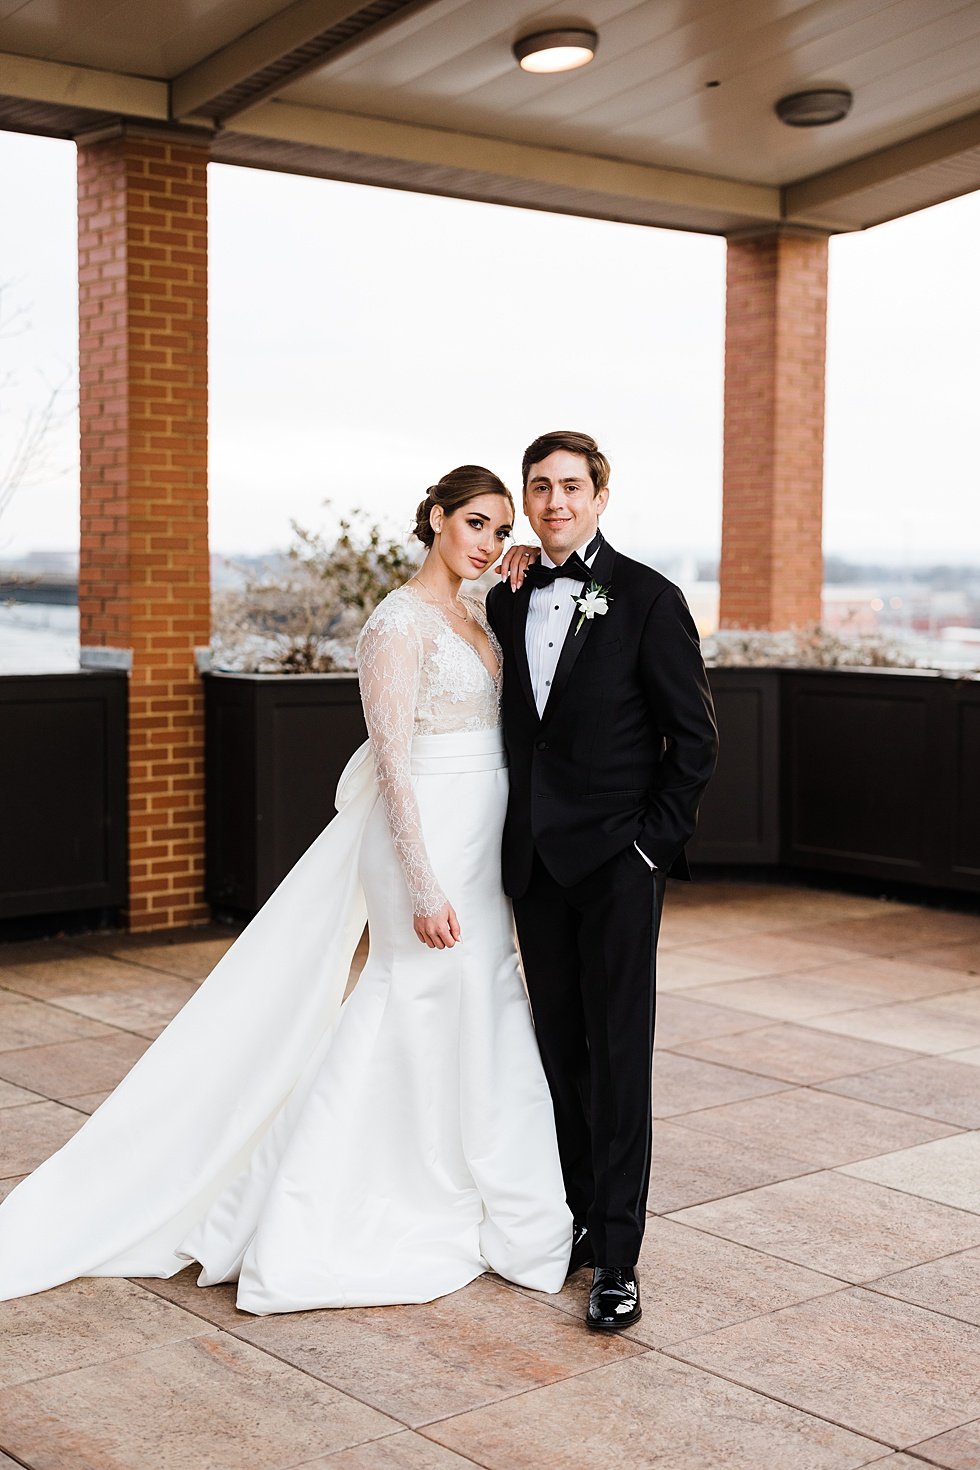  Bride and Groom wedding day portraits at Frazier History museum rooftop and garden. Lauren and Adam's winter wedding at St Agnes Catholic church and the Frazier History Museum. 